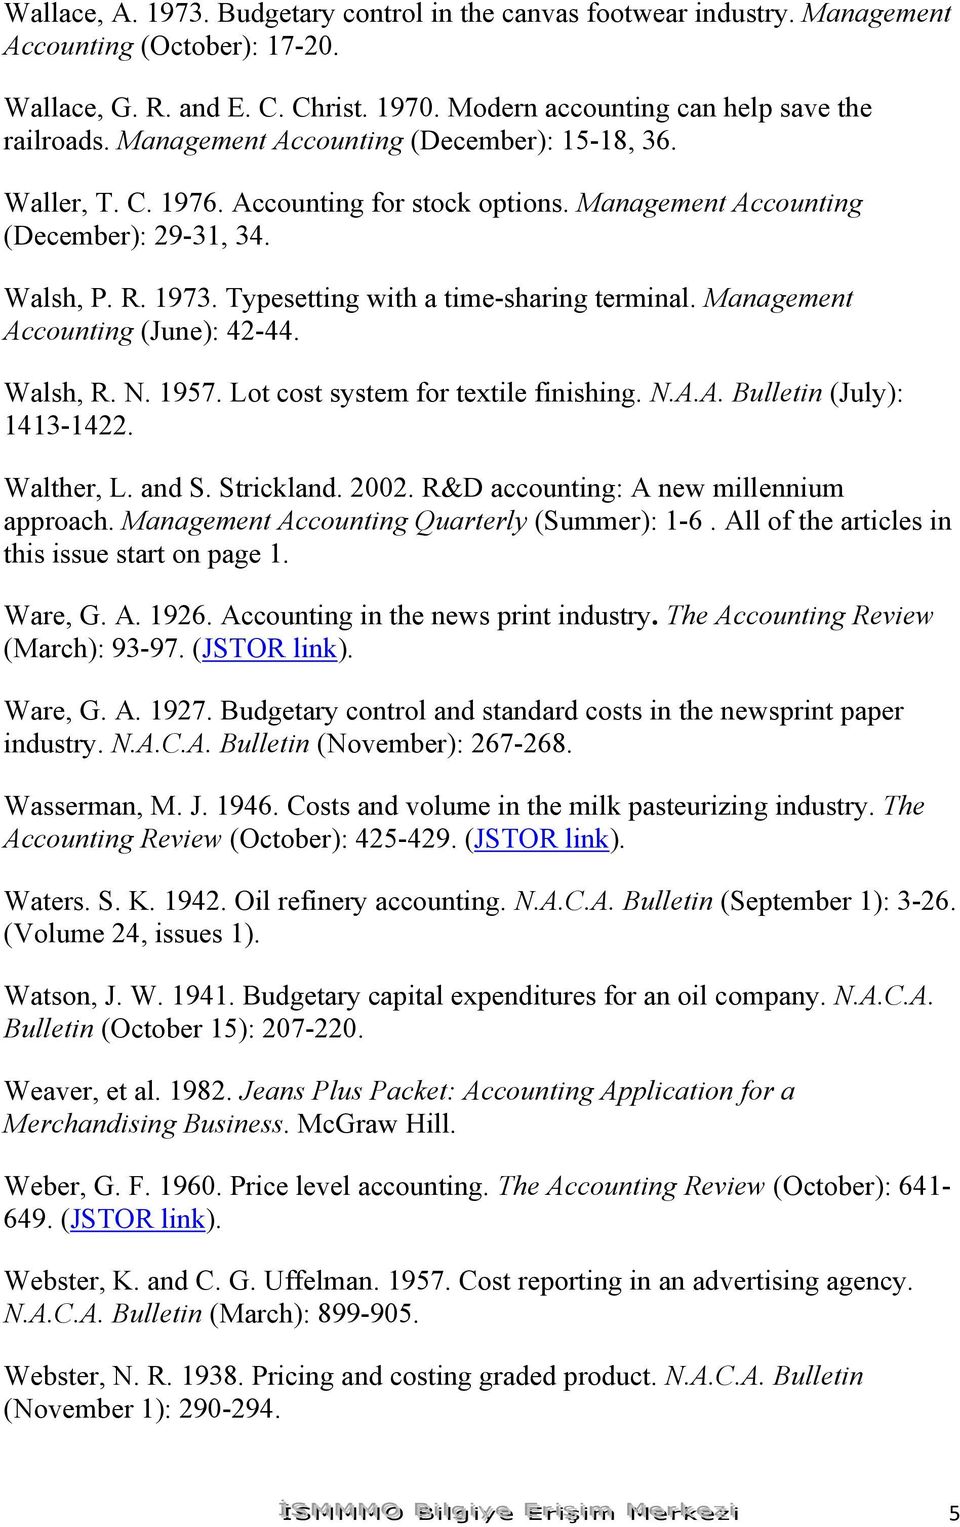 Management Accounting (June): 42-44. Walsh, R. N. 1957. Lot cost system for textile finishing. N.A.A. Bulletin (July): 1413-1422. Walther, L. and S. Strickland. 2002.